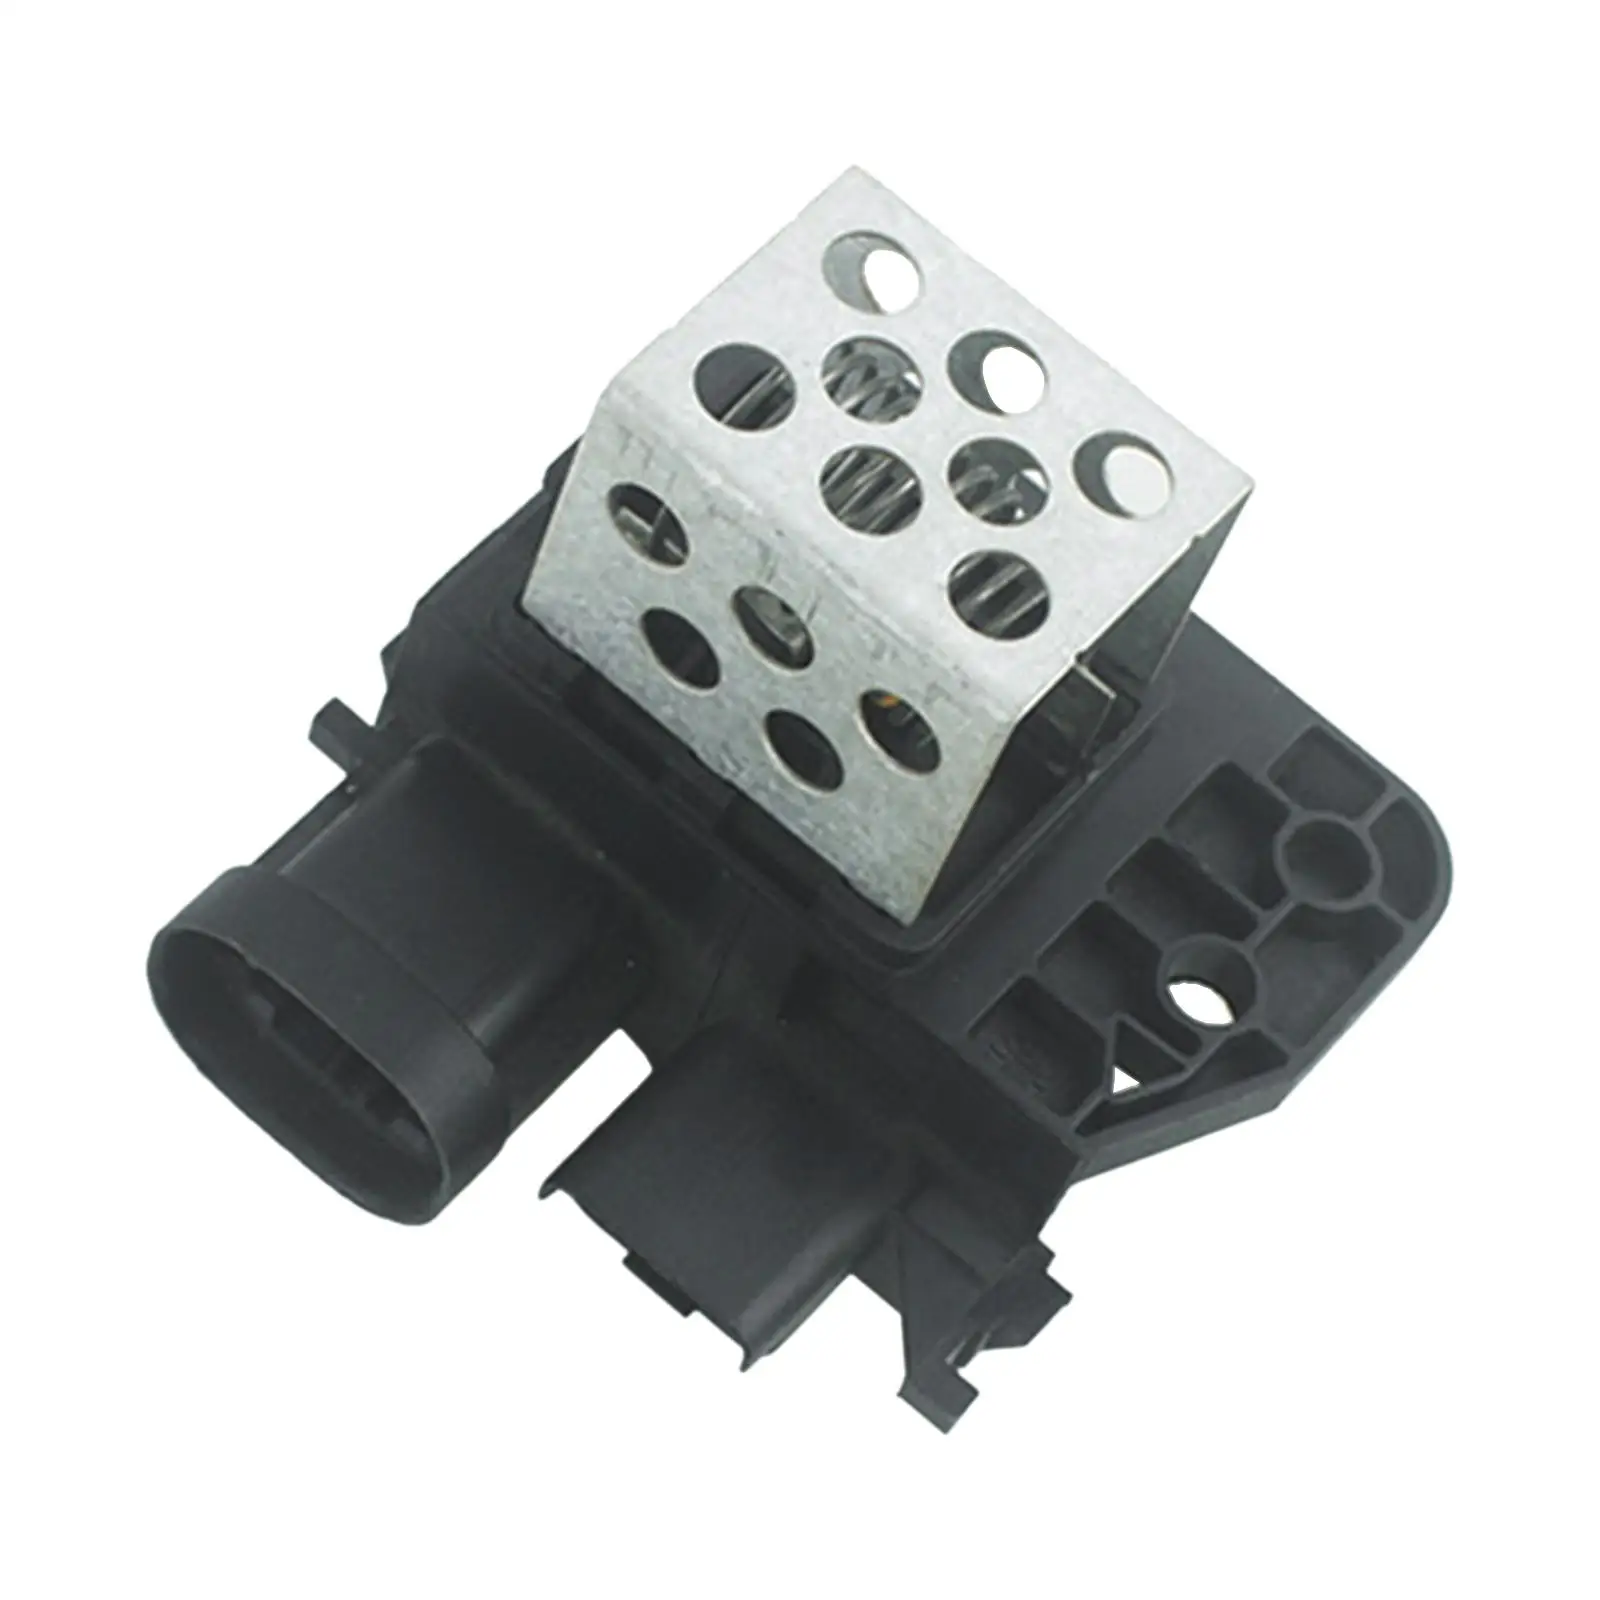 Heater Blower Motor Resistance Radiator Fan Resistance 9673999980 for Peugeot Replaces Spare Parts High Performance